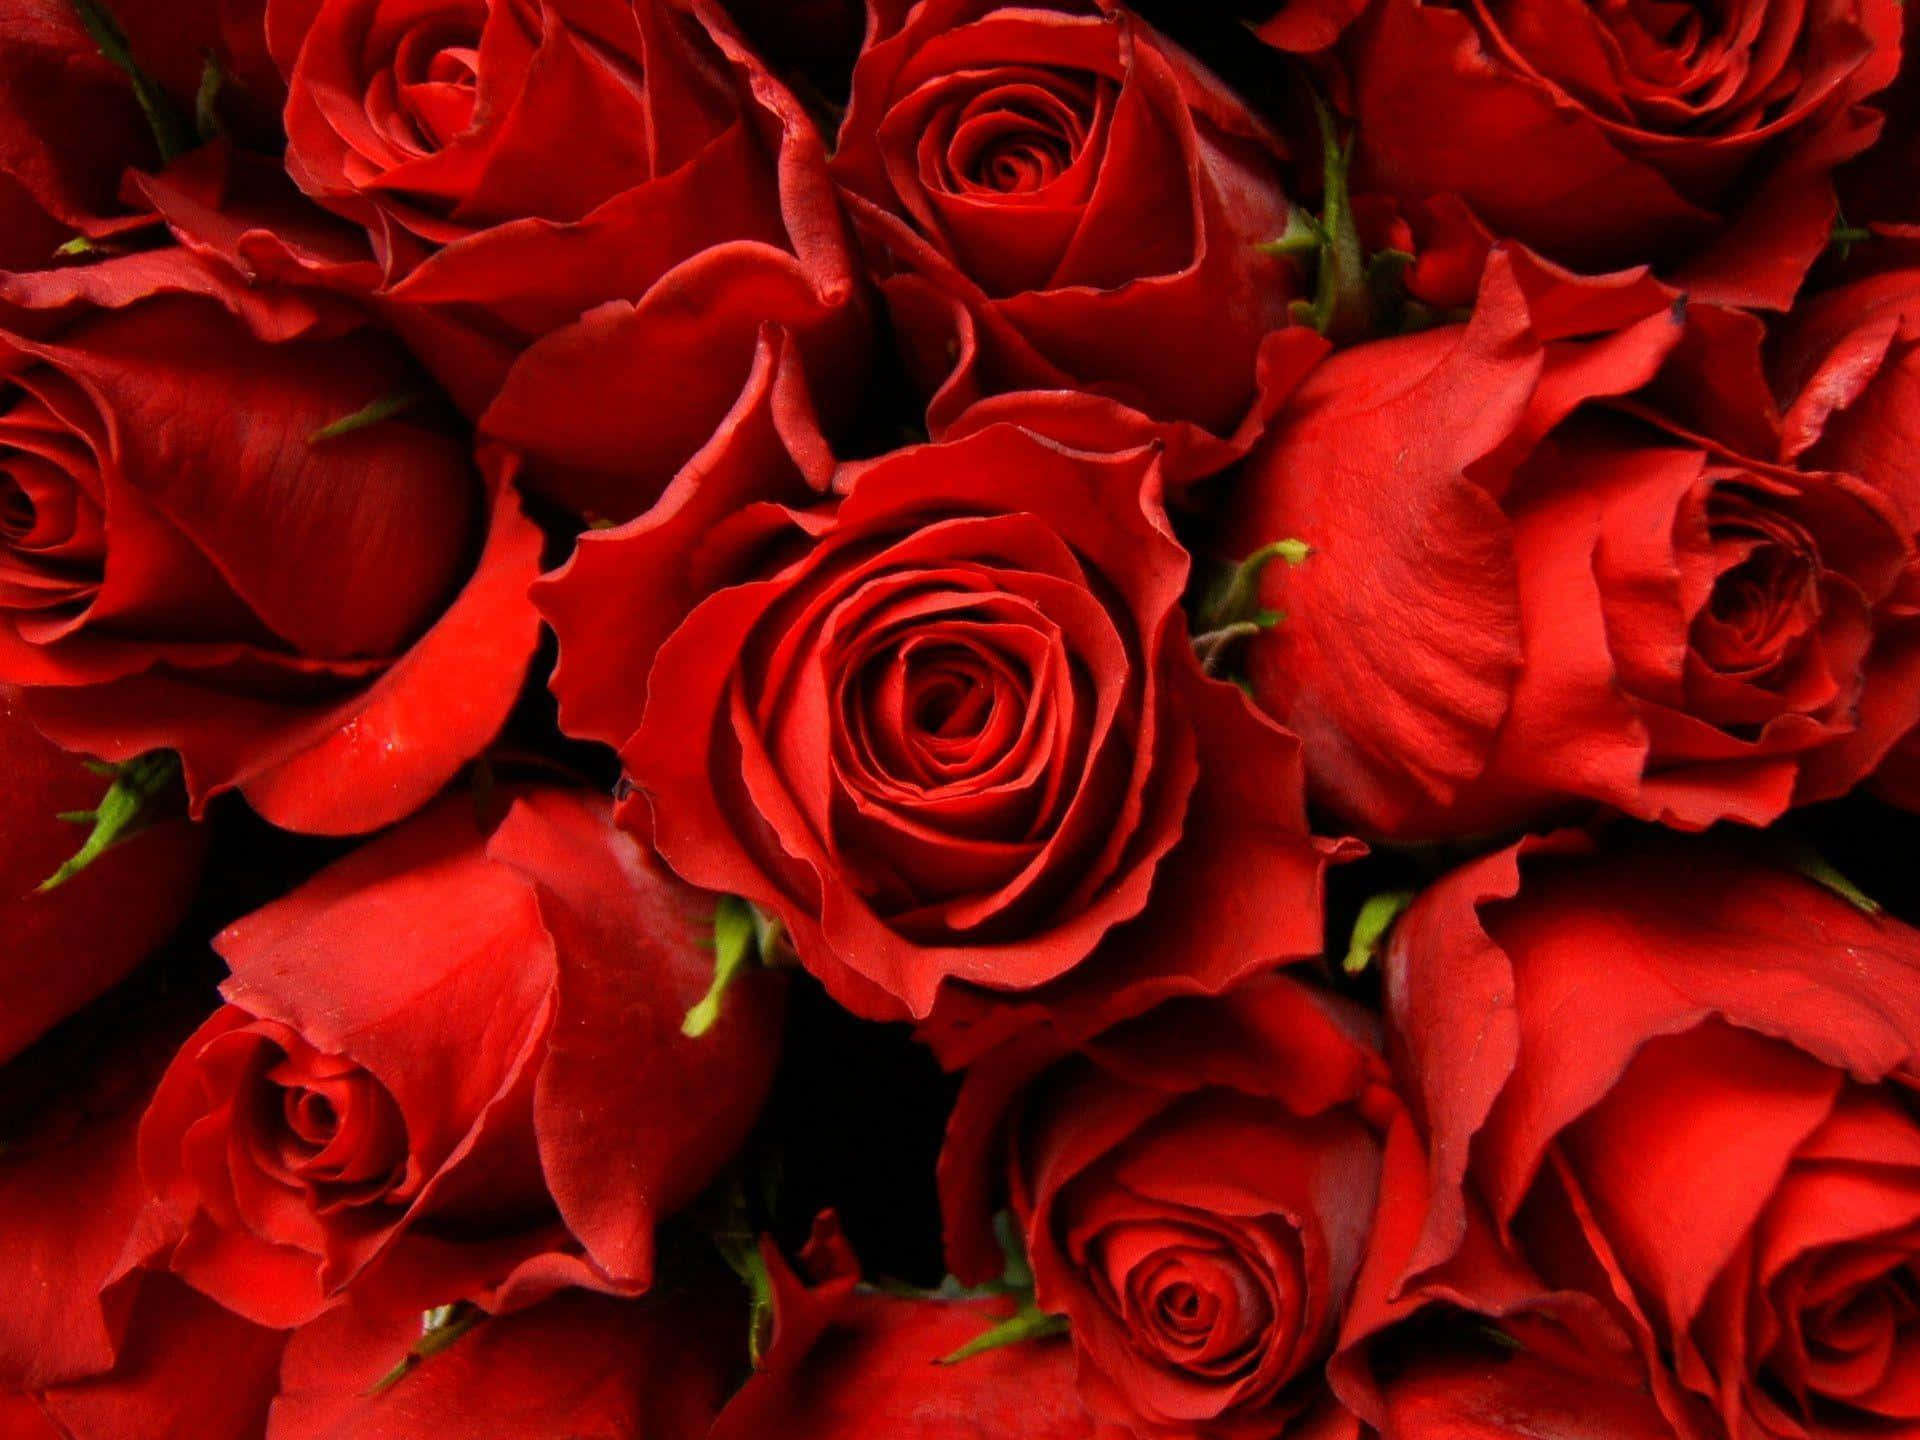 Red Rose - Nature's Most Beautiful Gift